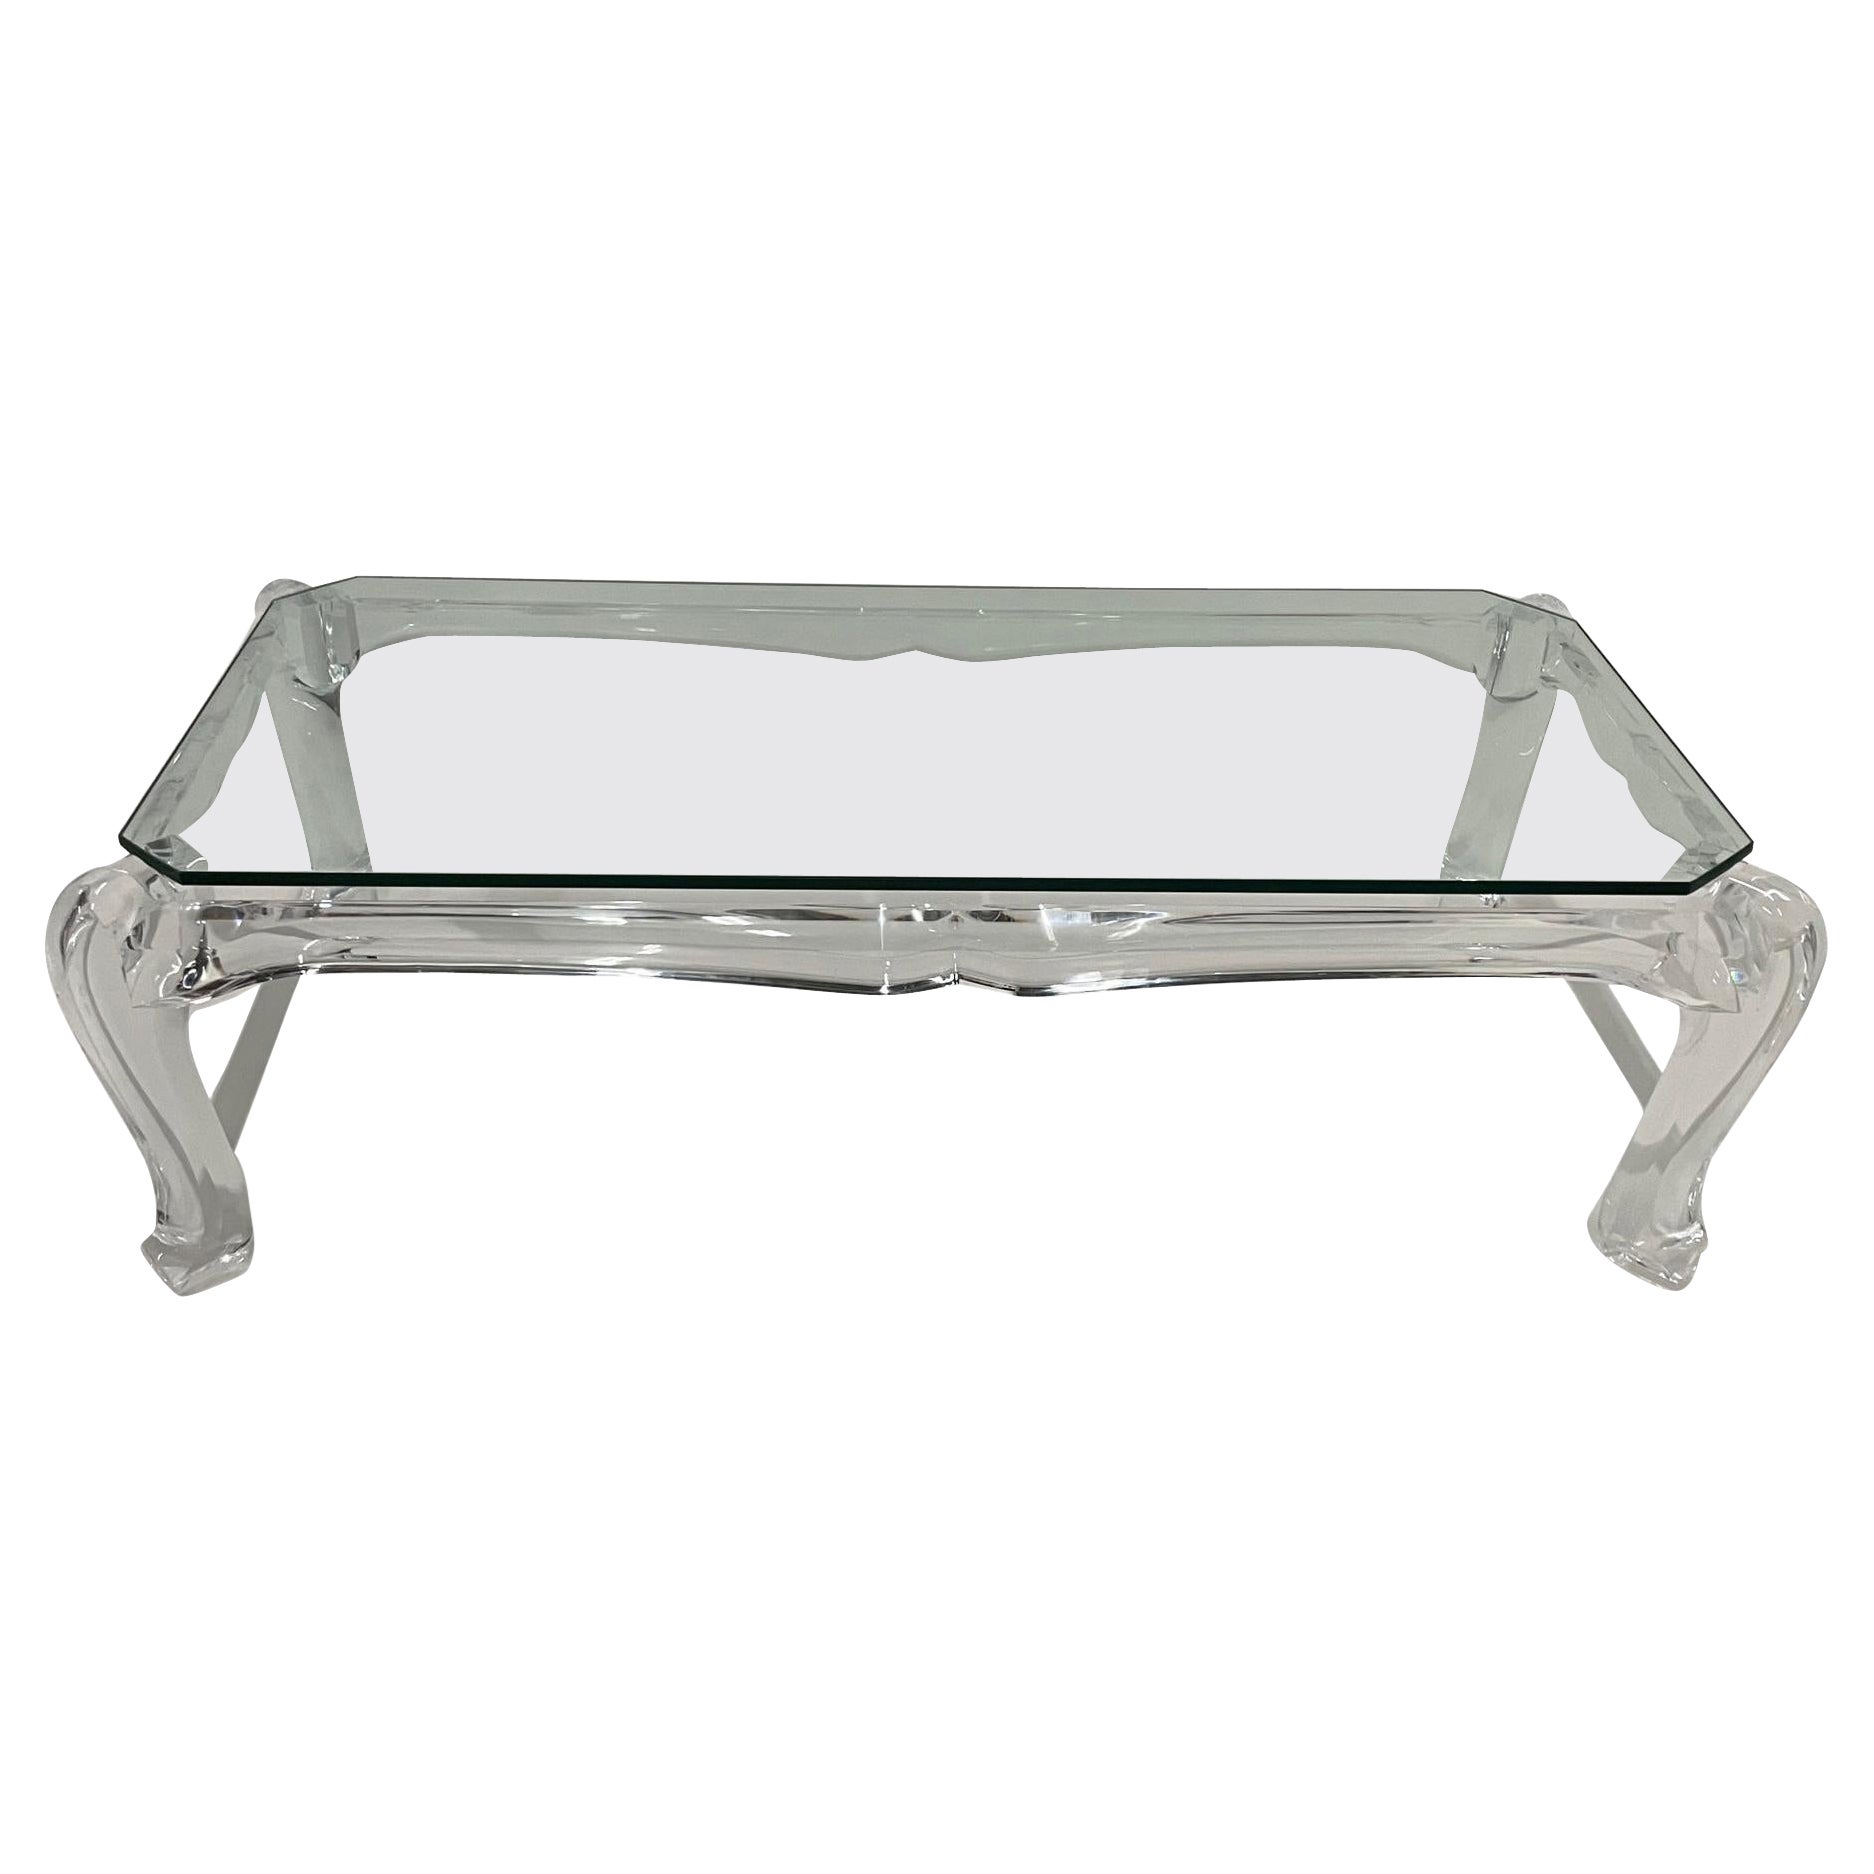 Super Hot Lucite Sculptural Mid-Century Modern Coffee Table